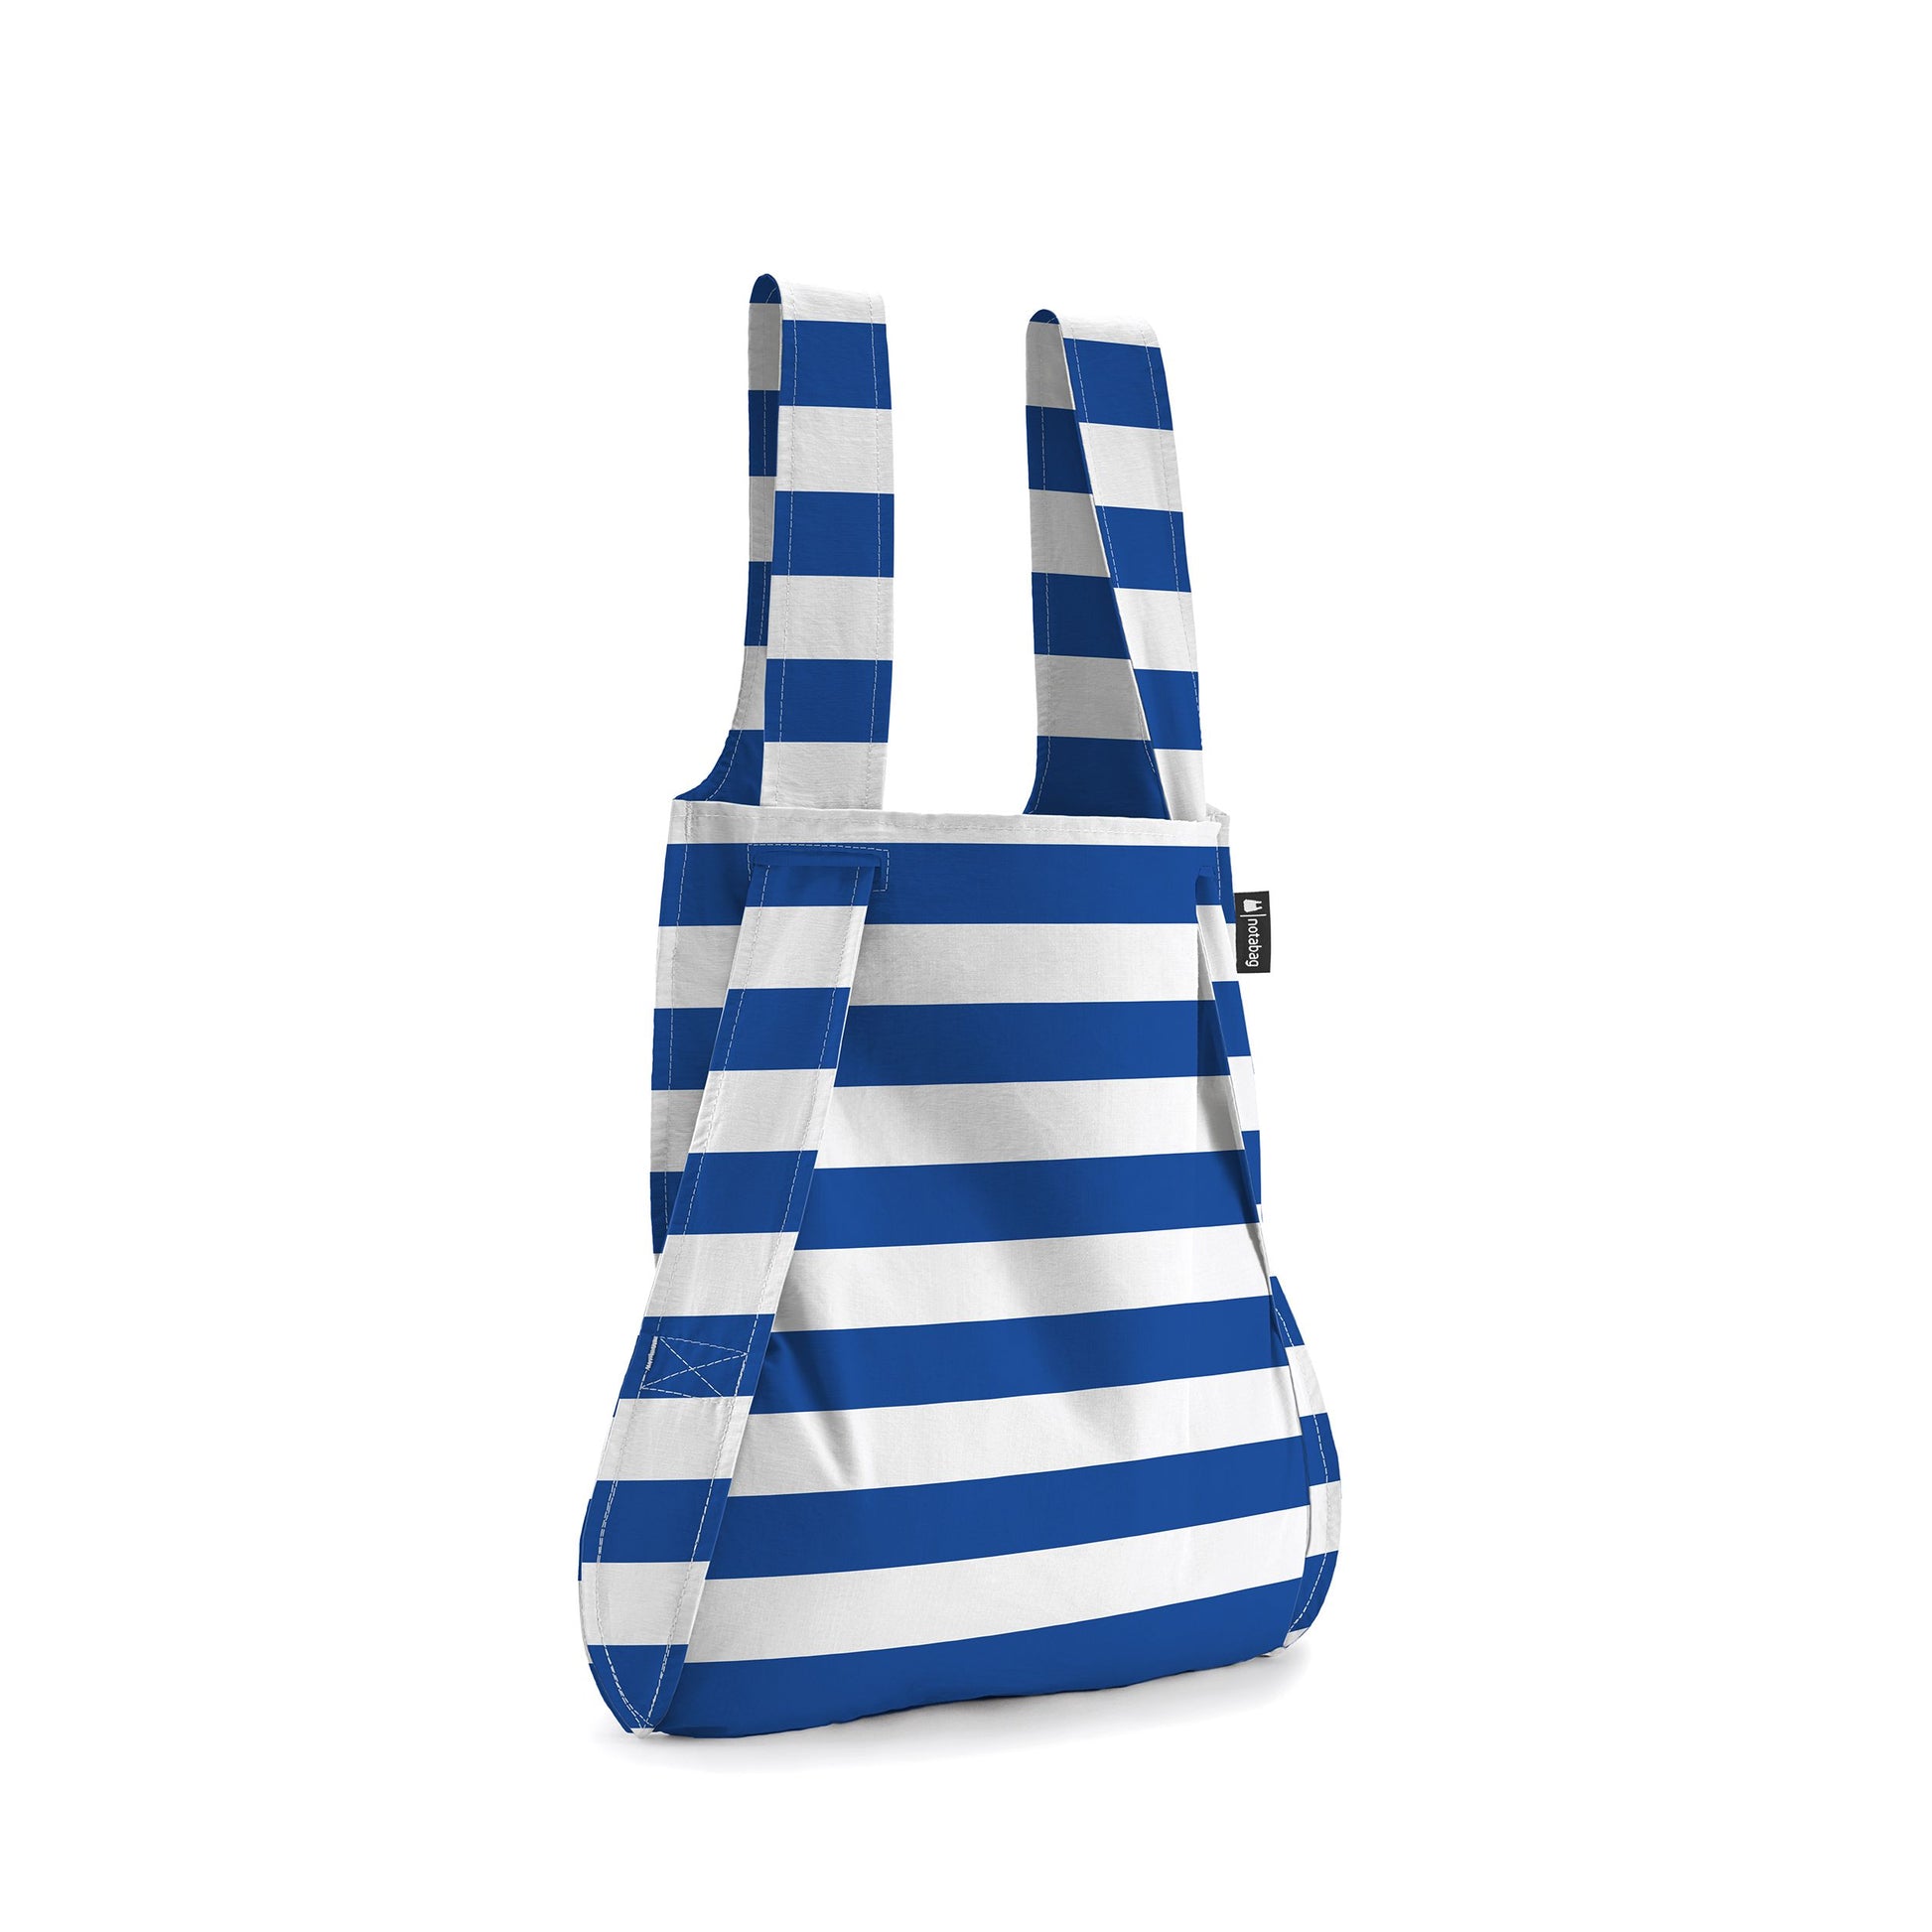 Foldable backpack marine stripes from Notabag